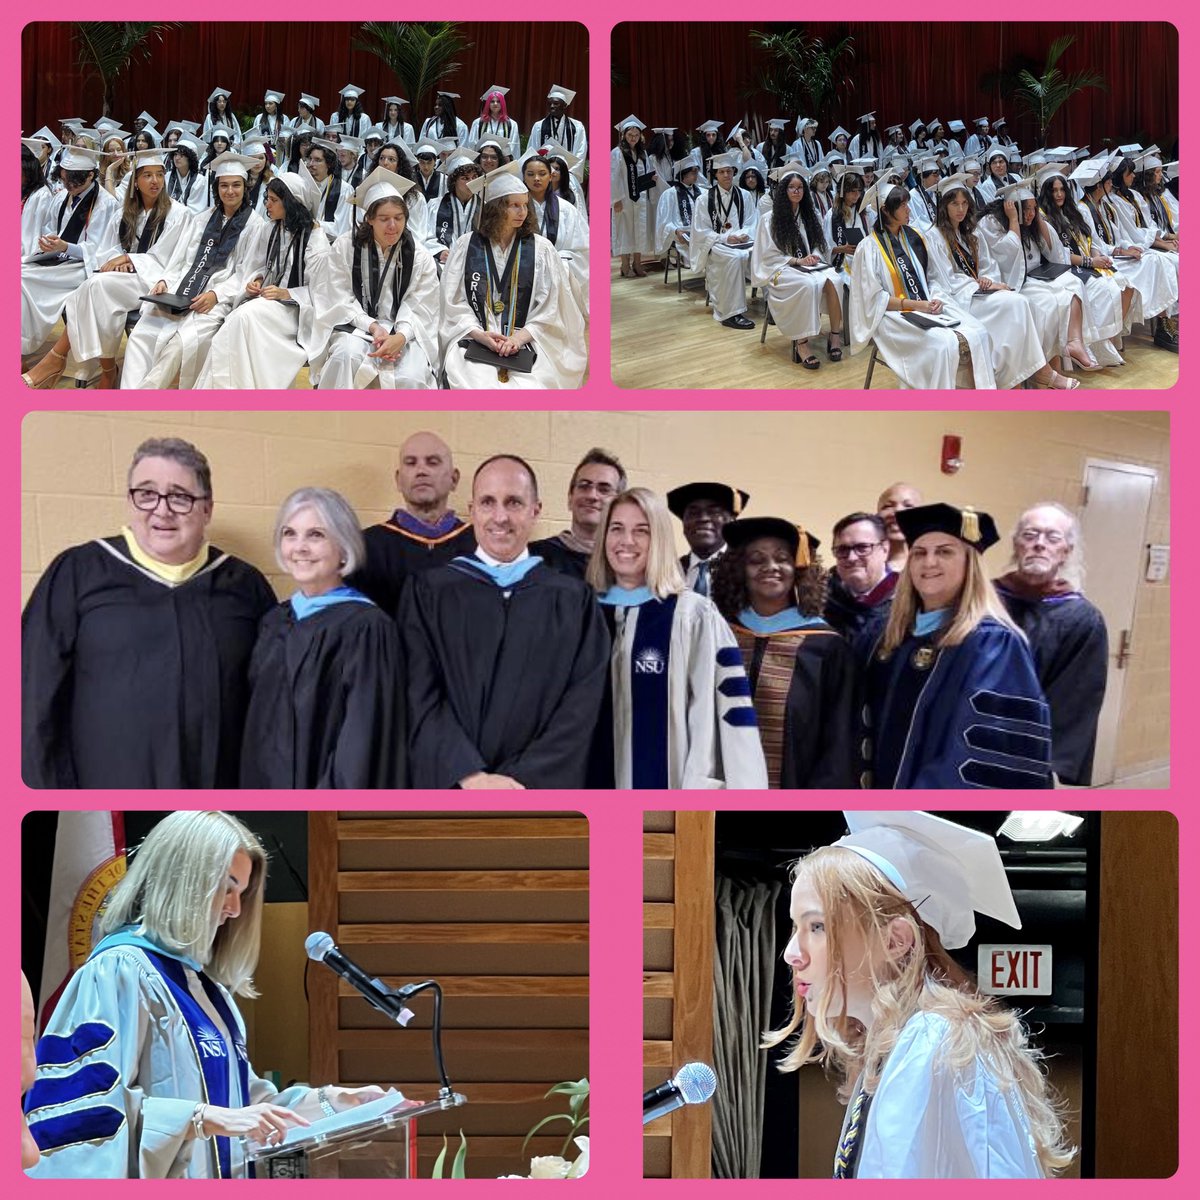 Congratulations to the impressive and equally artistic 2023 graduating class ⁦@DASHphantoms⁩. You are truly an inspiration! May the road ahead always rise to meet you. #GoPhantoms #CROTheHeartofItAll ⁦@SuptDotres⁩ ⁦@MDCPS⁩ ⁦@MjLewis13⁩ ❤️❤️❤️